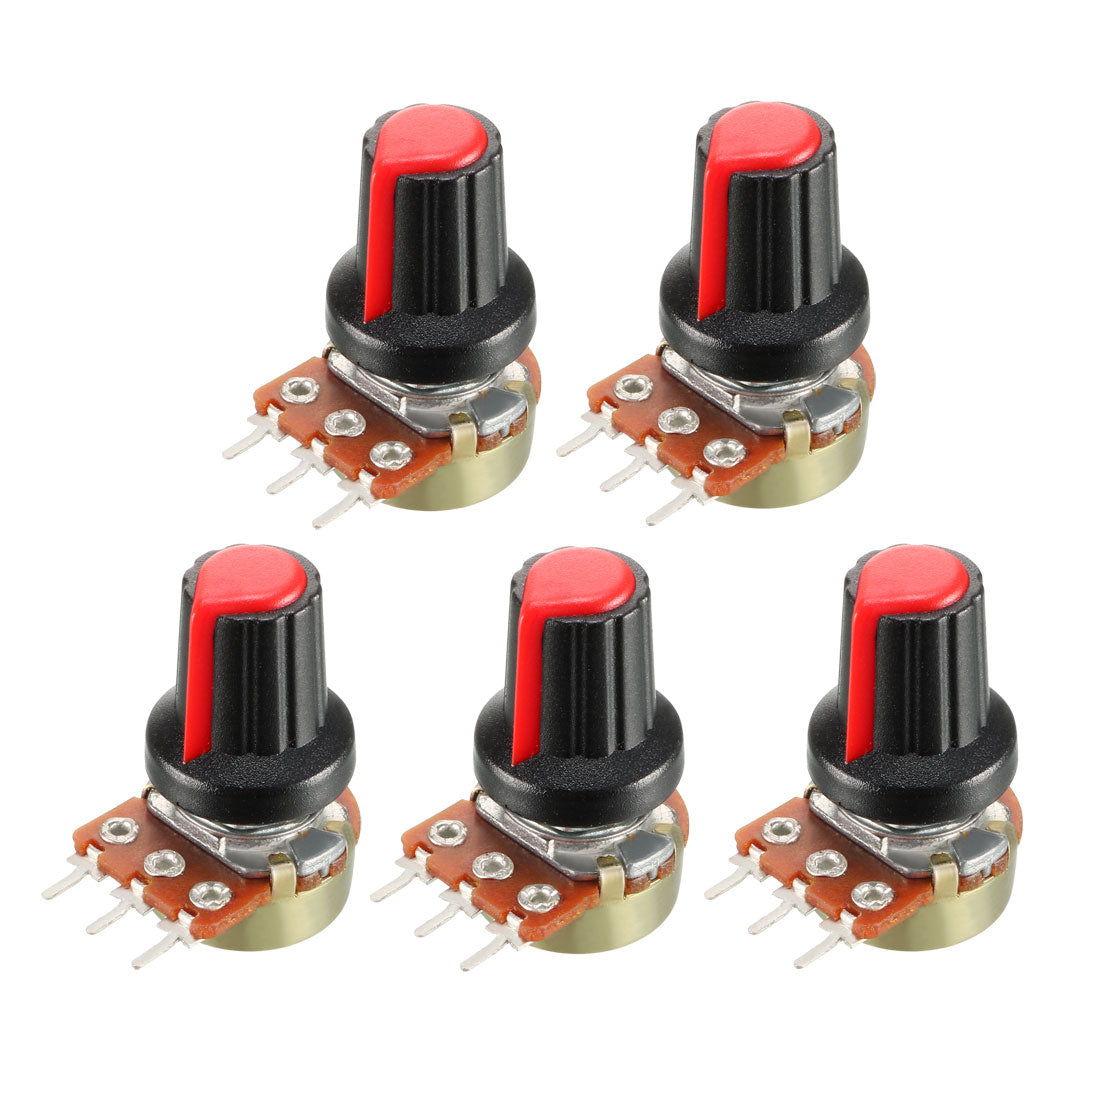 uxcell Uxcell 5Pcs 10K Ohm Variable Resistors Single Turn Rotary Carbon Film Taper Potentiometer with Knobs